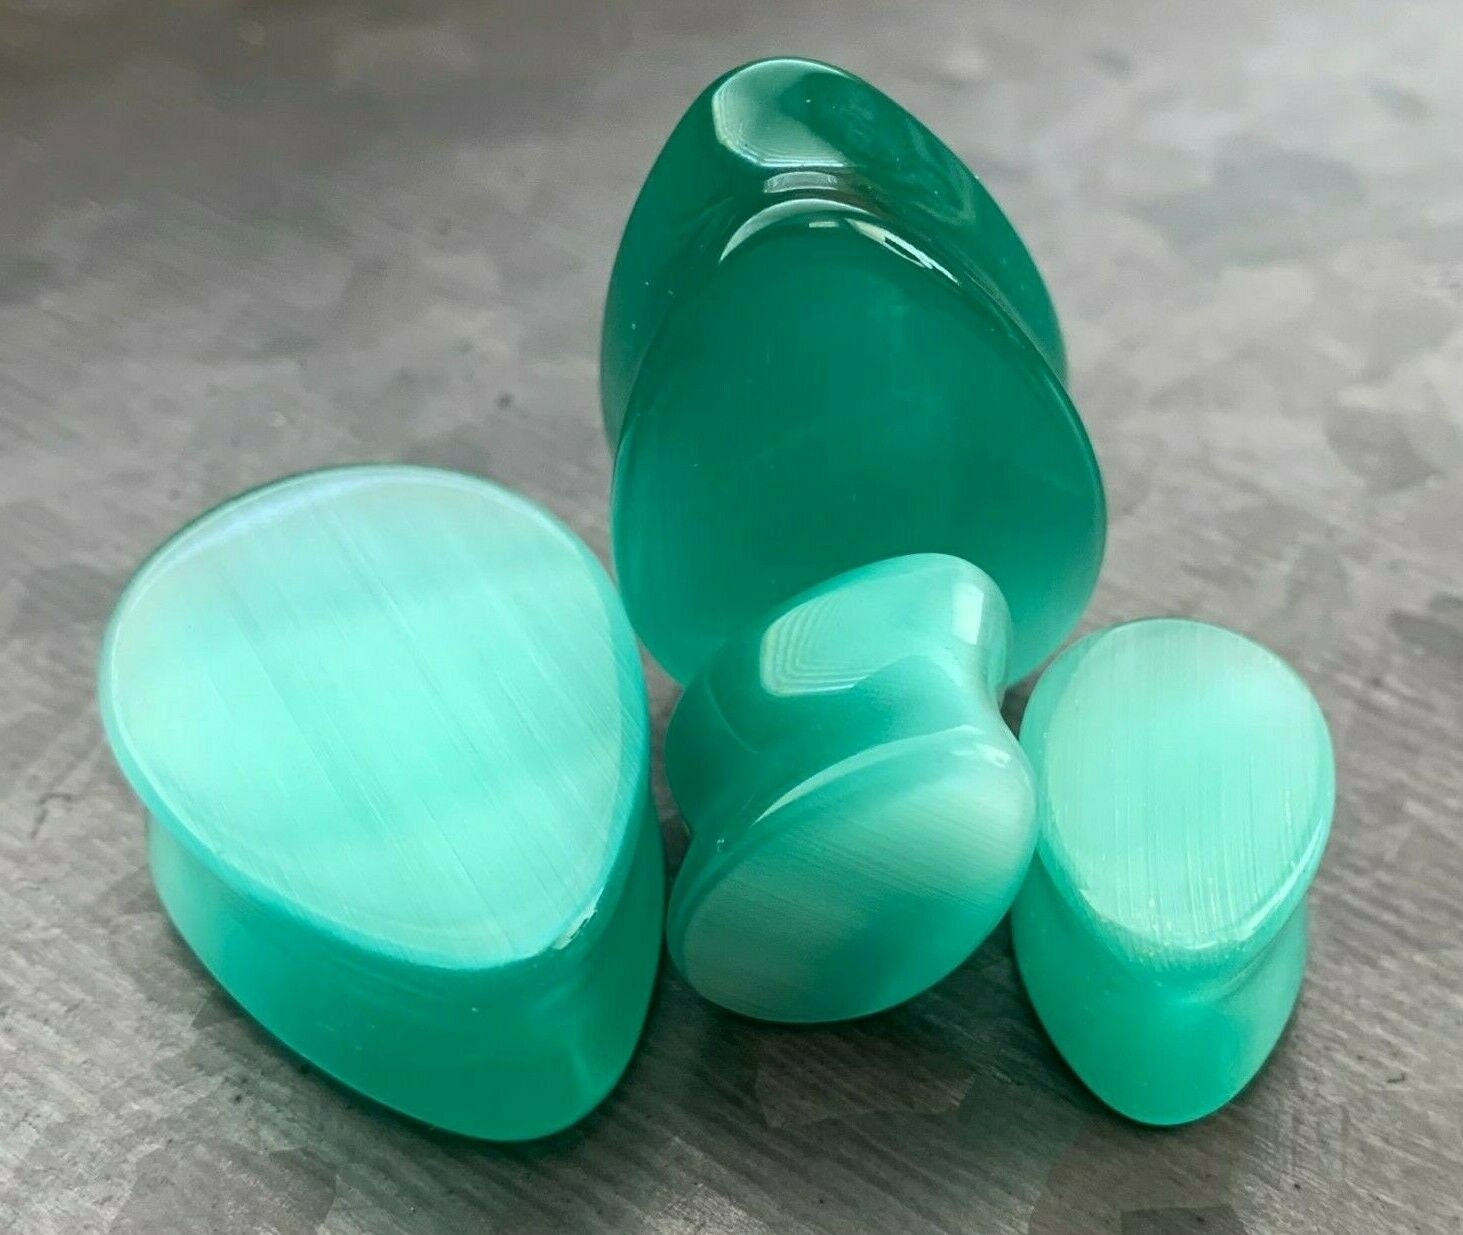 PAIR of Unique Sea Foam Green Cat Eye Stone Double Flare Teardrop Plugs - Gauges 2g (6mm) up to 1" (25mm) available!